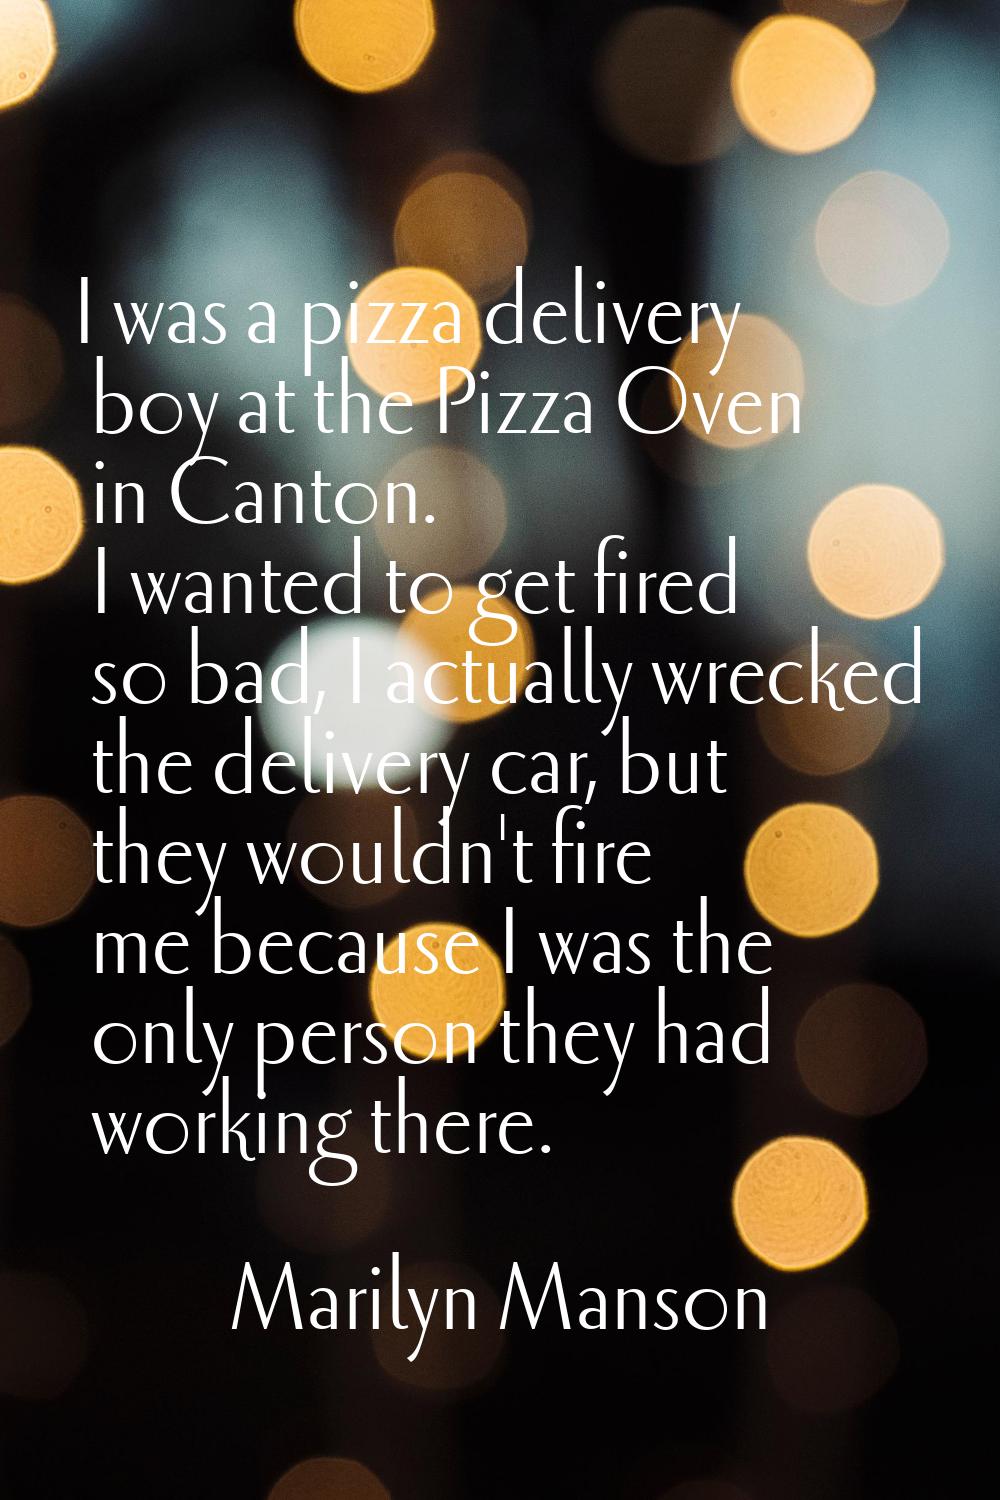 I was a pizza delivery boy at the Pizza Oven in Canton. I wanted to get fired so bad, I actually wr